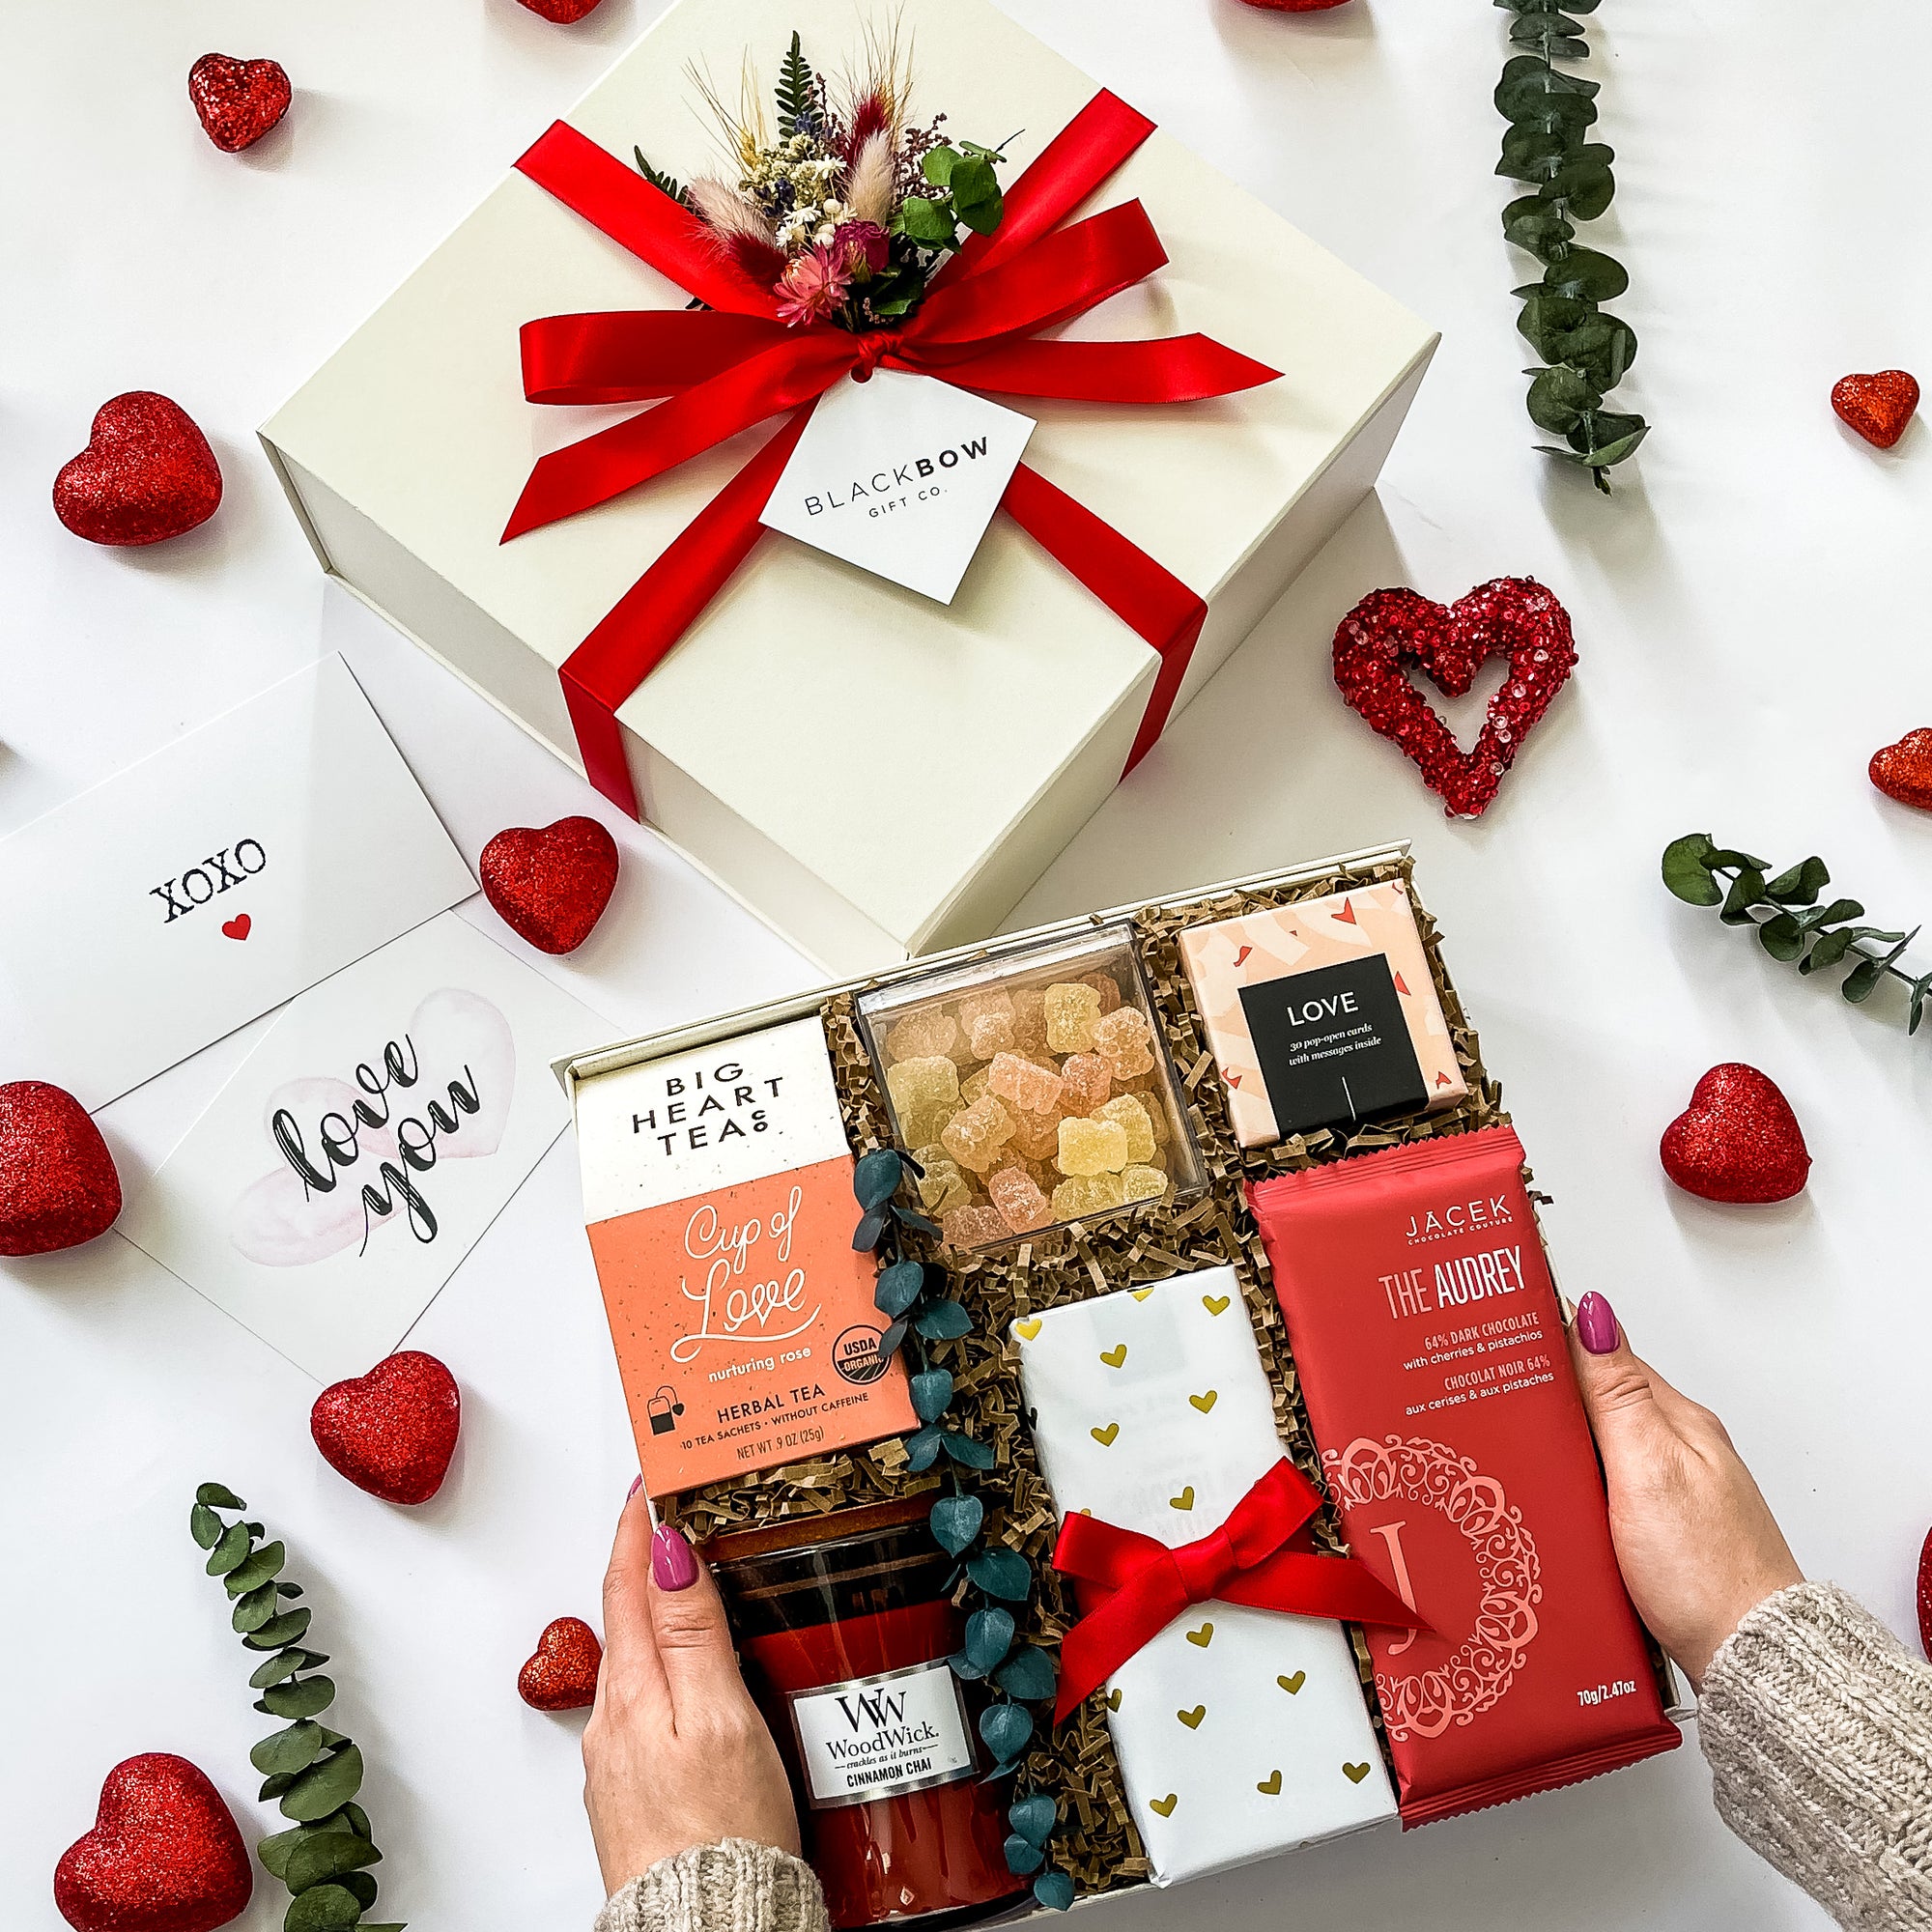 Skip the Flowers: Unbox Love with a Curated Valentine's Gift!